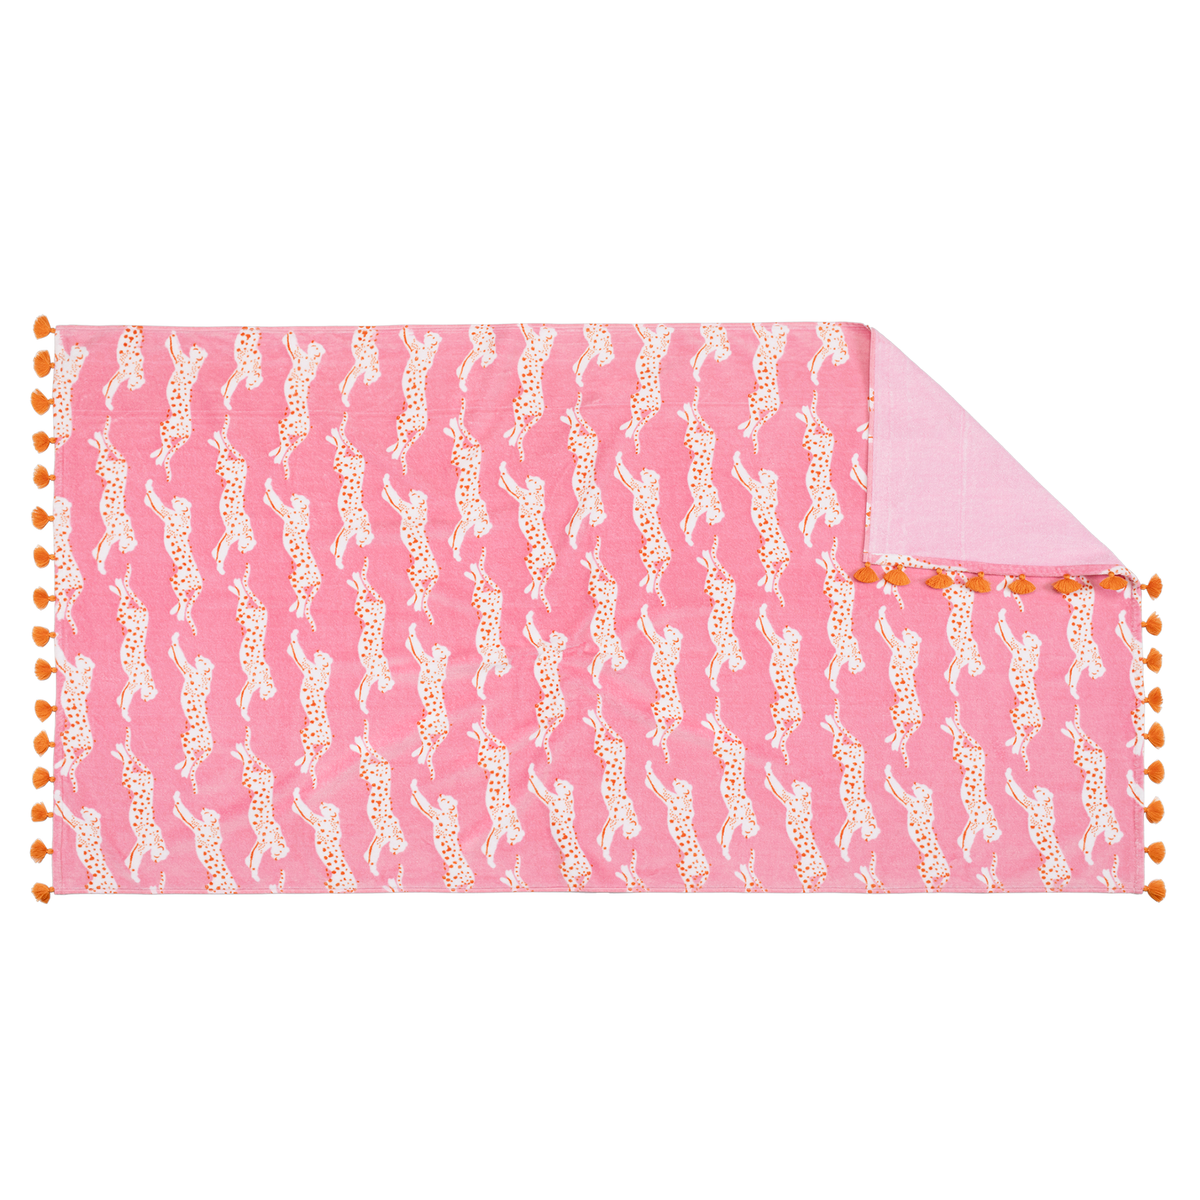 Flat Silo of Matouk Leaping Leopard Beach Towels in Color Pink Sugar